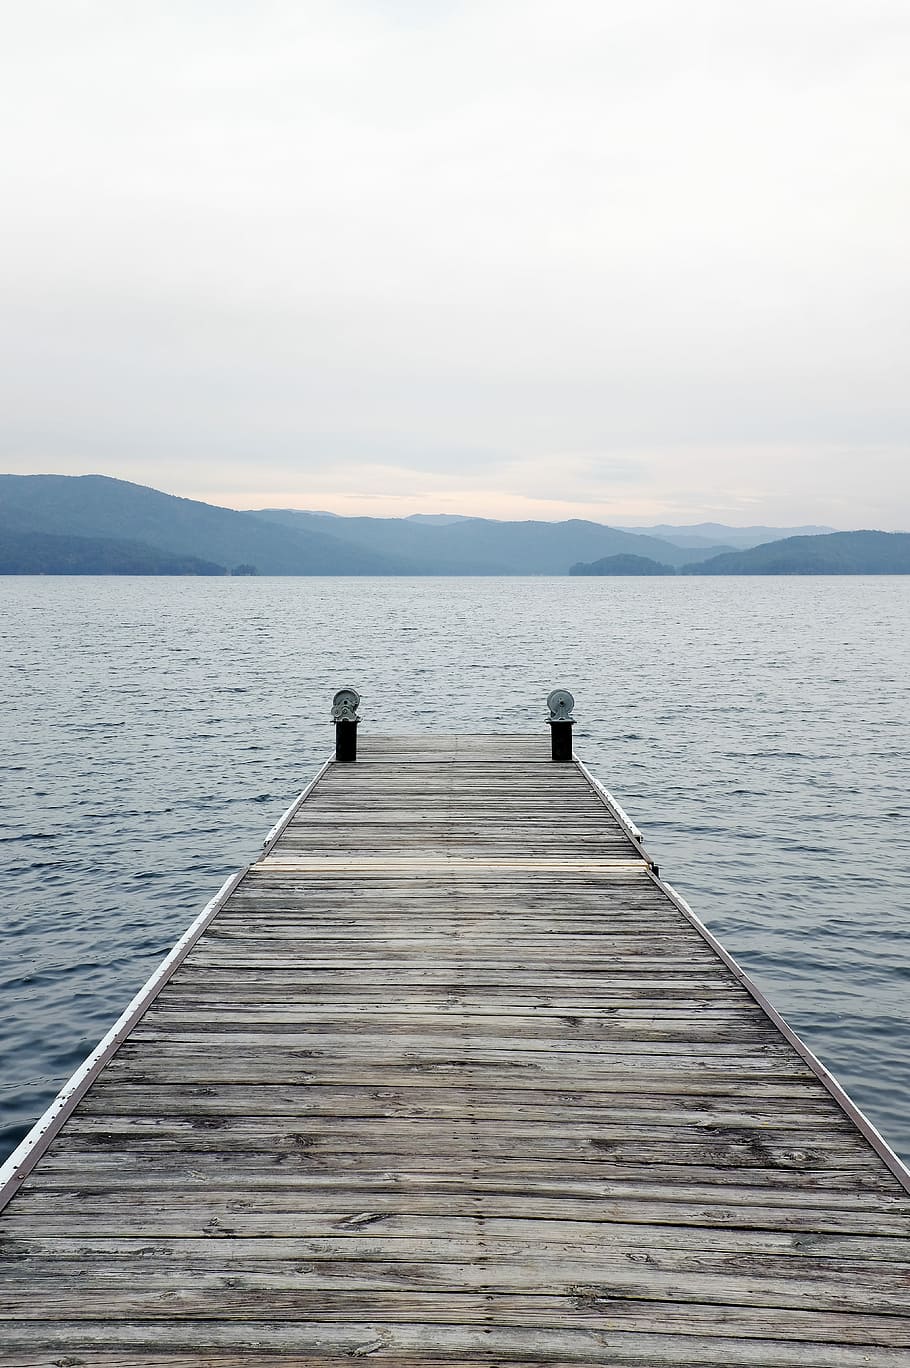 brown, wooden, dock, daytime, blue, docks, gray, lakes, mountains, piers